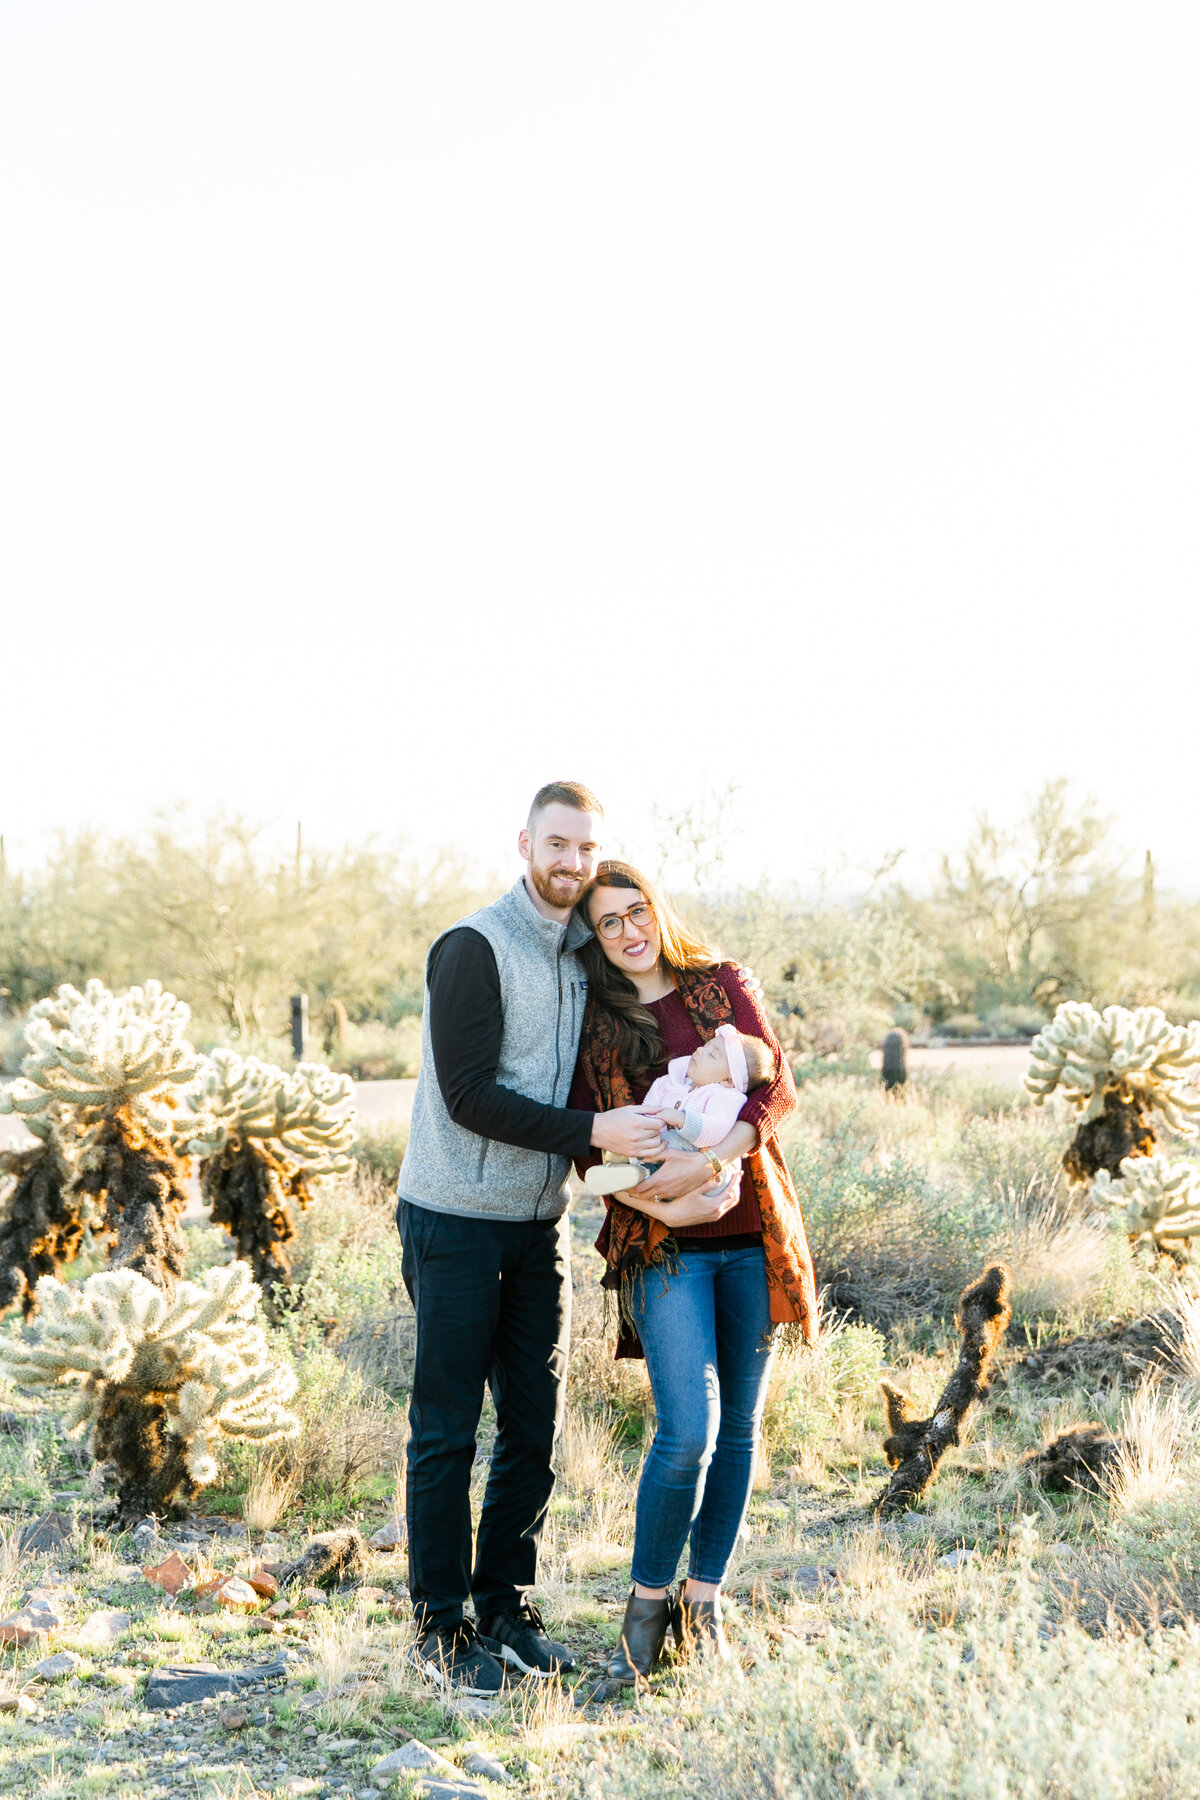 Karlie Colleen Photography - Scottsdale Family Photography - Lauren & Family-63